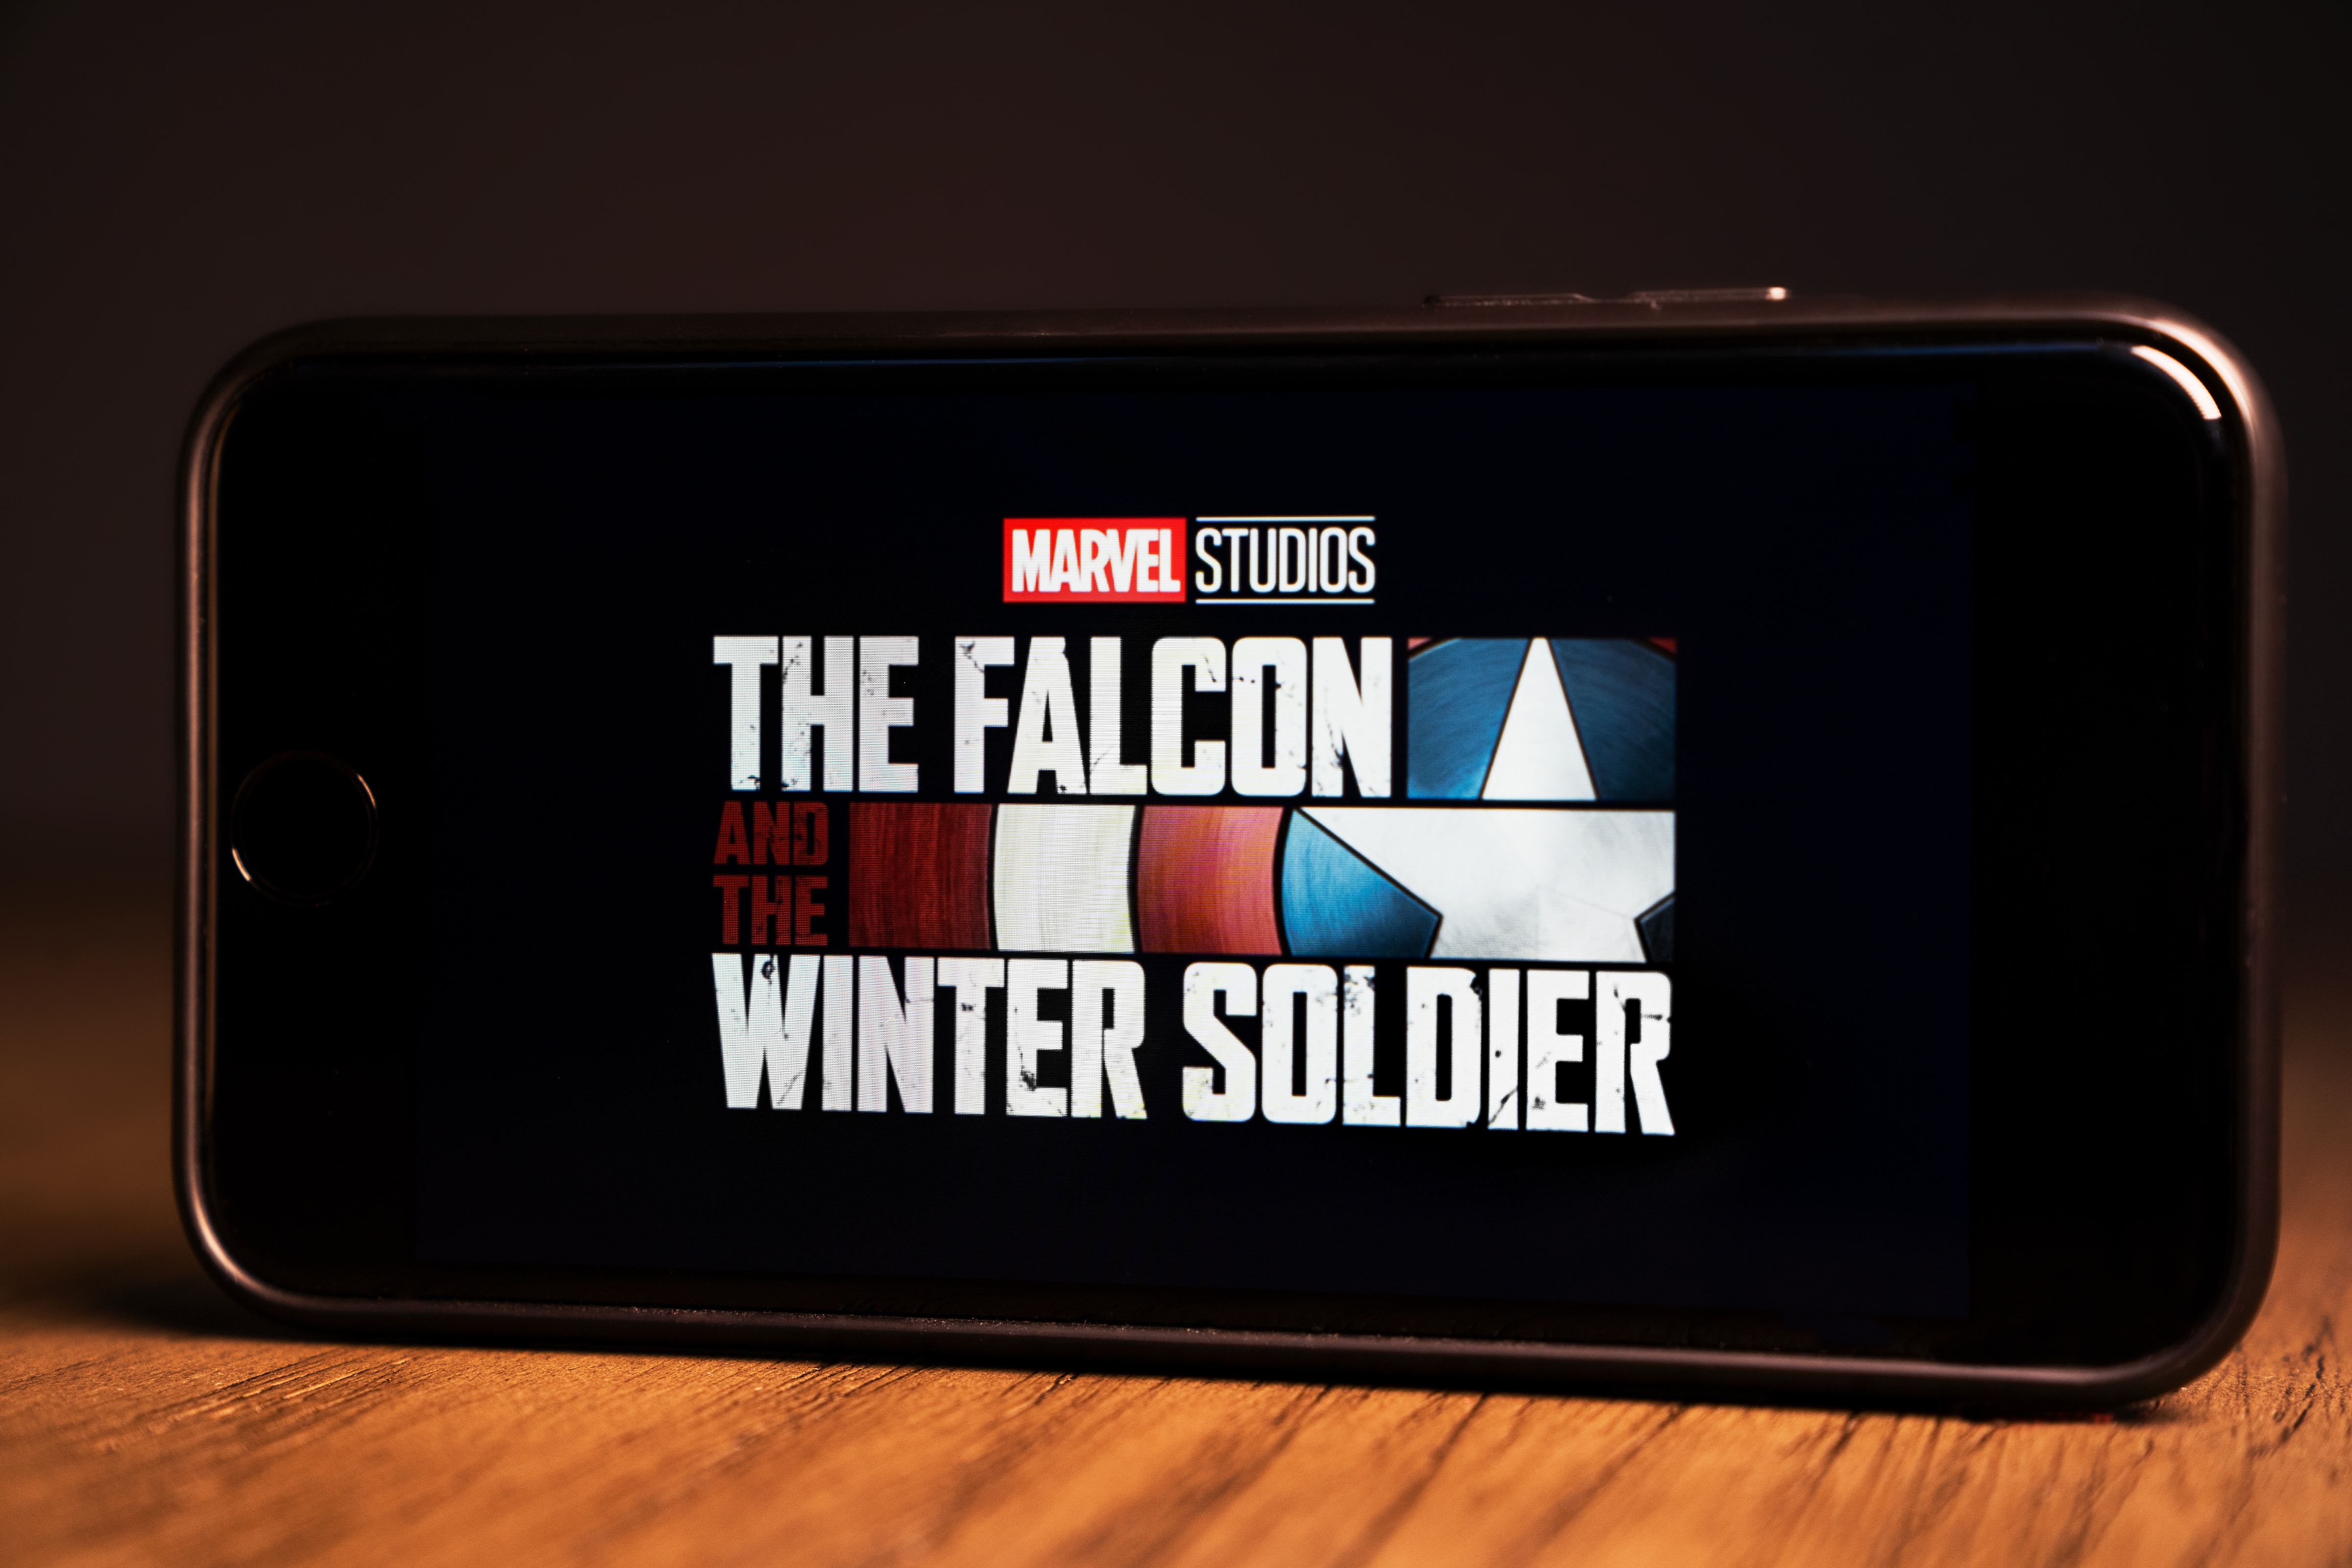 Marvel Universe Movies to Watch as a Refresher Before The Falcon & The Winter Soldier